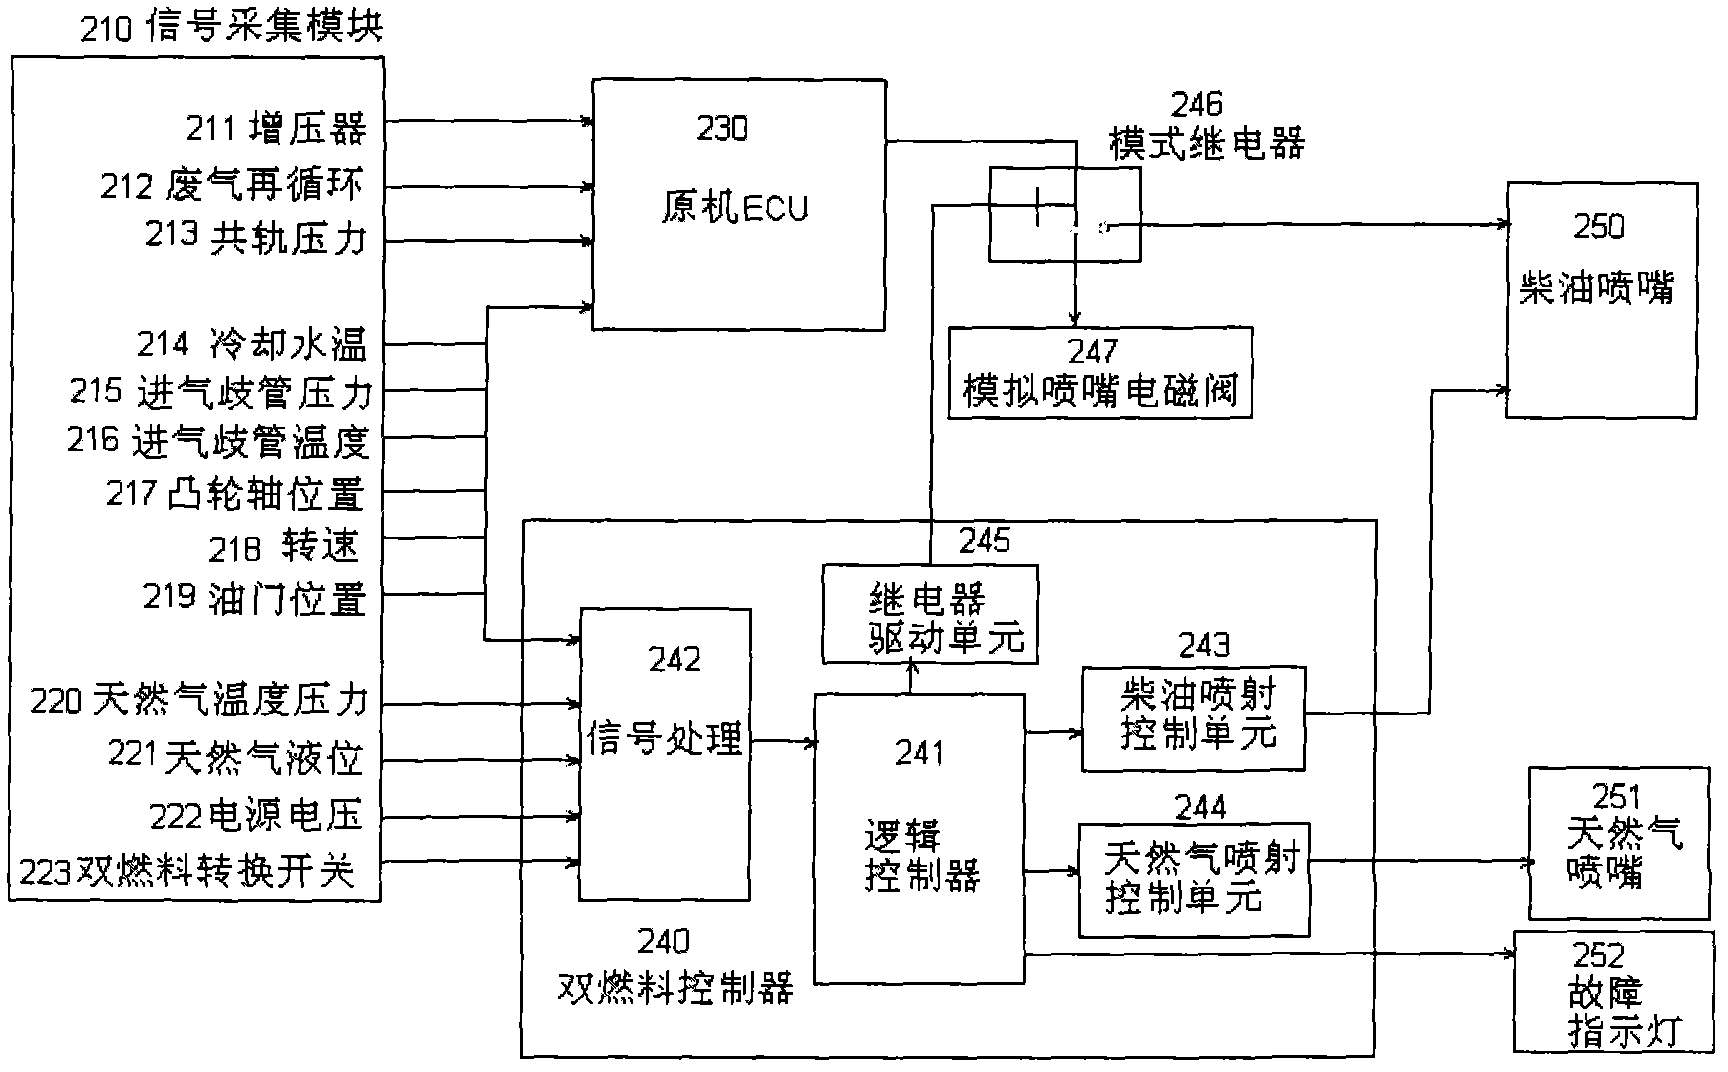 Diesel engine/natural gas dual-fuel engine electric control system